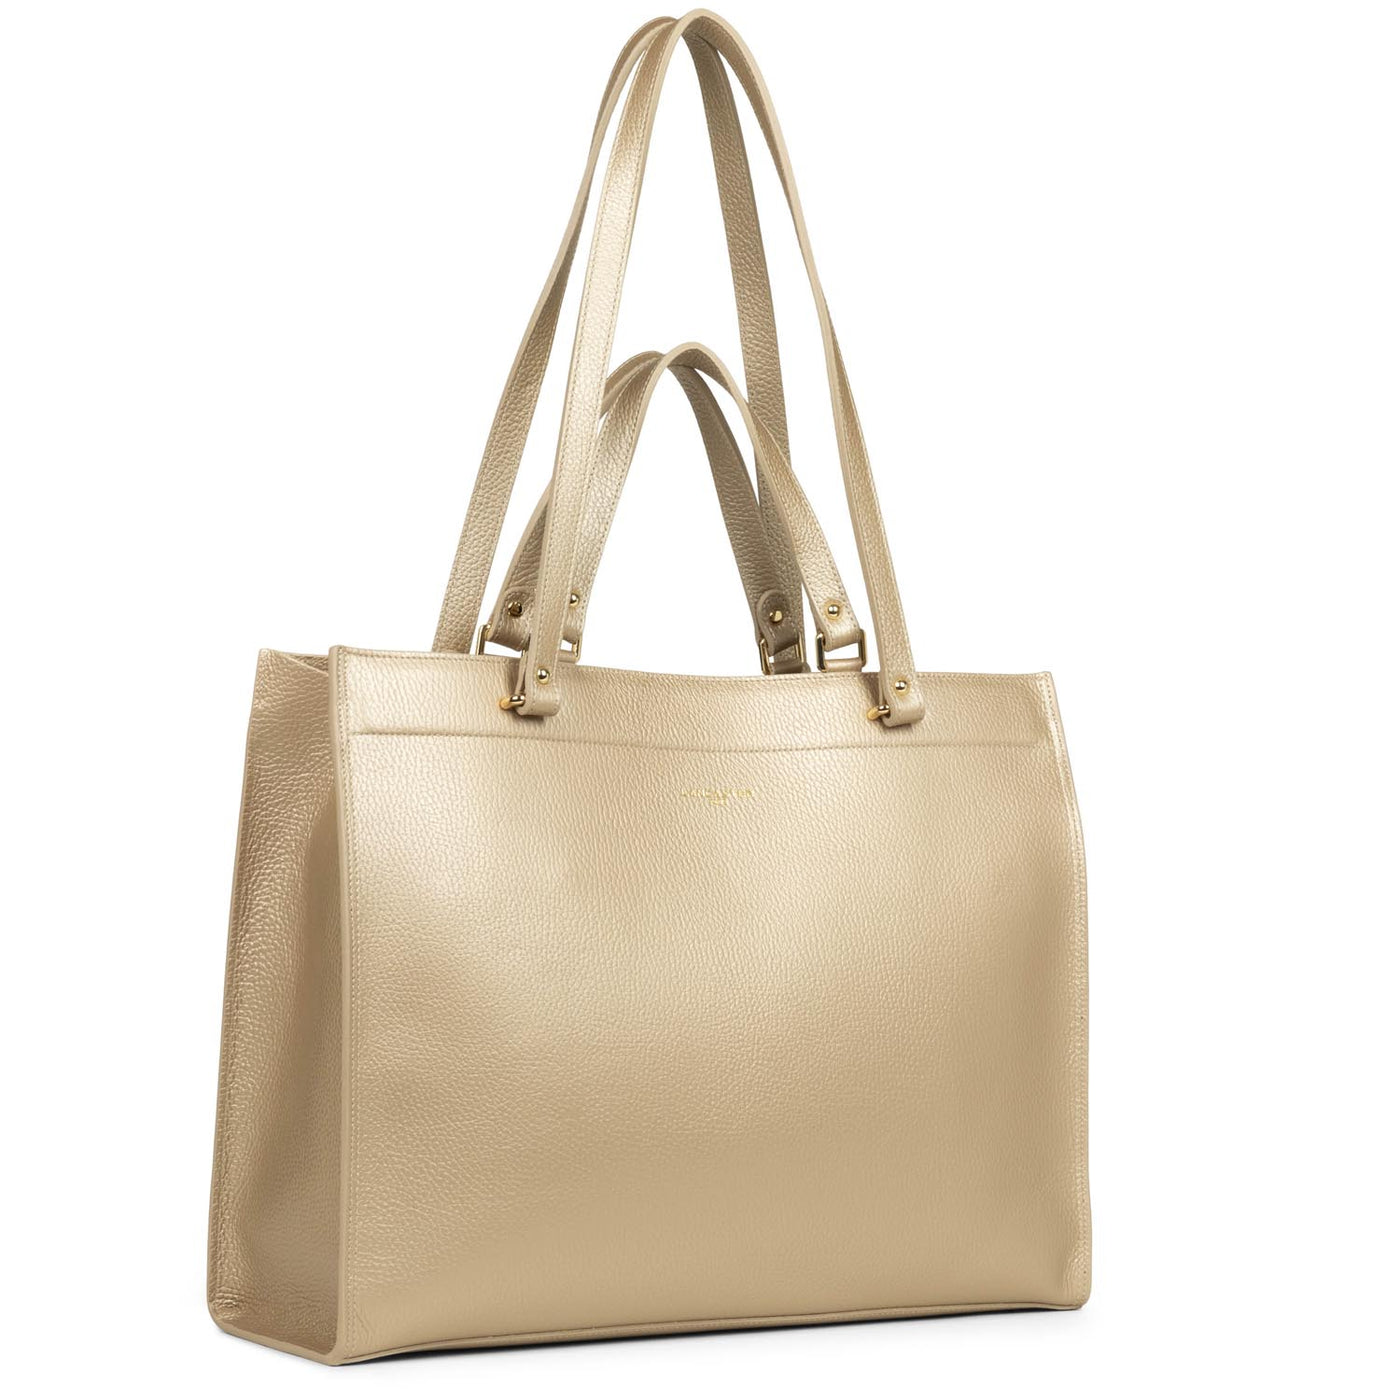 extra large tote bag - foulonné double #couleur_champagne-in-nude